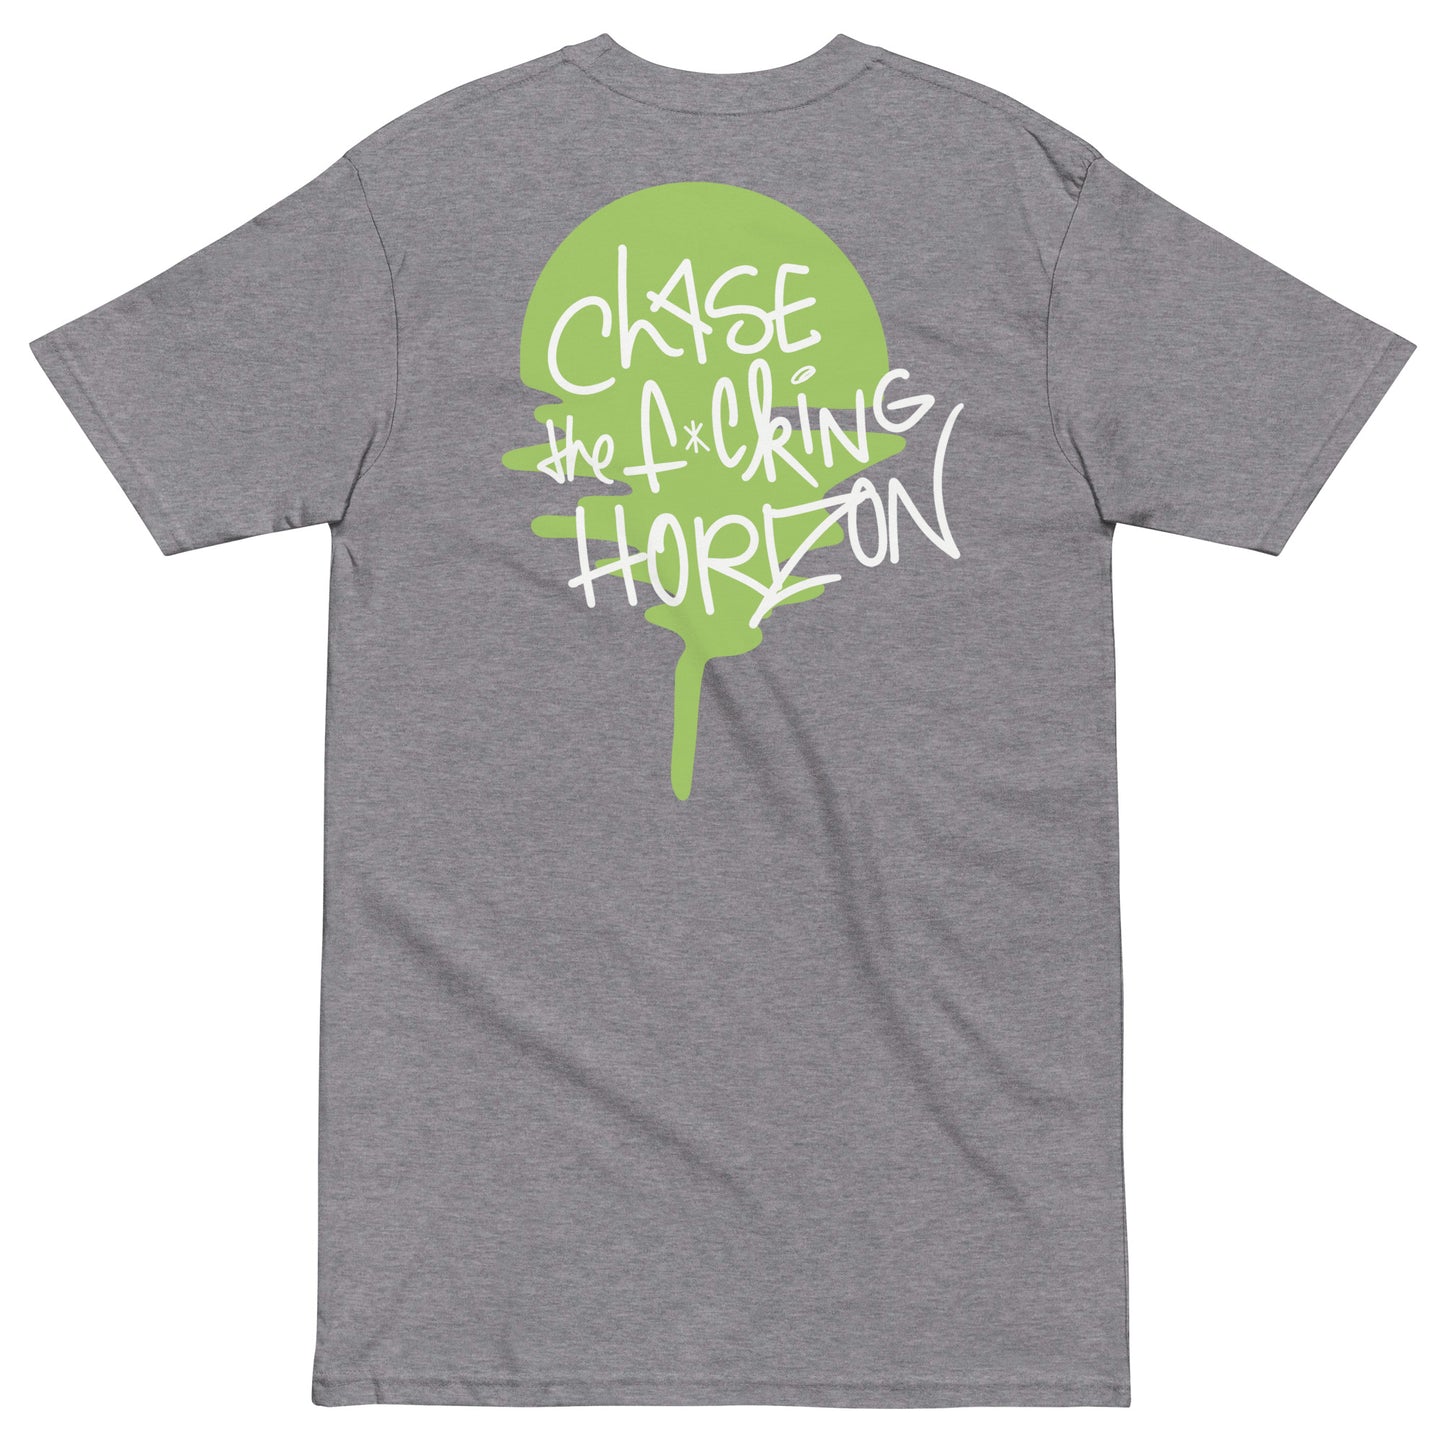 OTH CHASE TF HORIZON DREAMERS COLLECTION T-SHIRT (MORE COLORS)